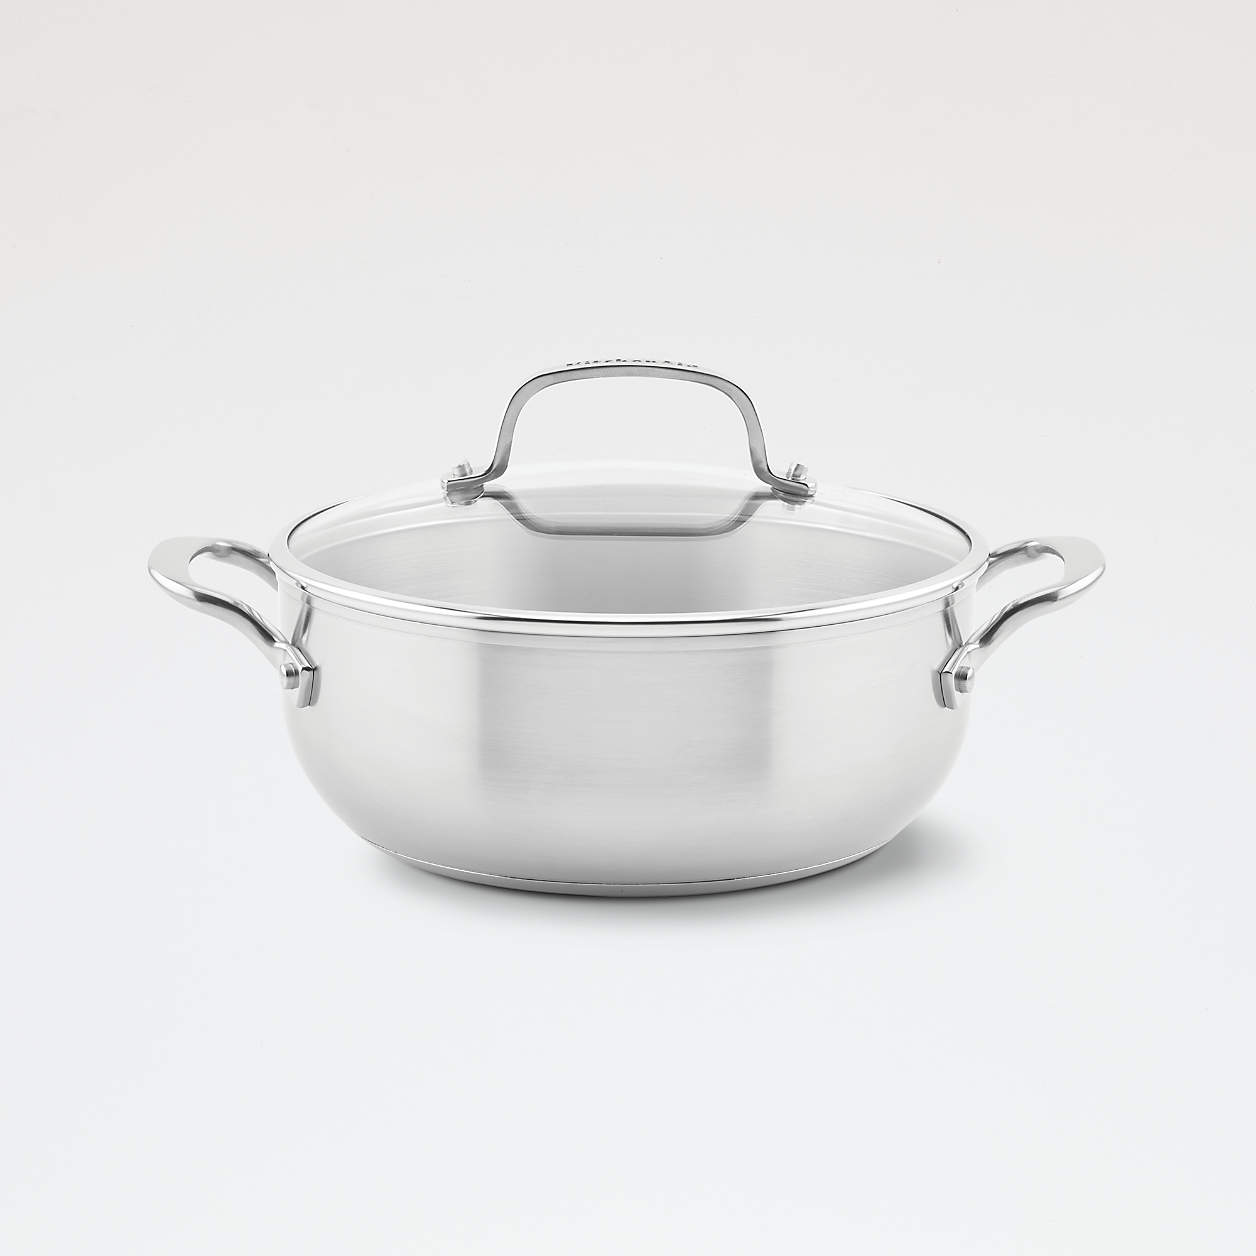 Kitchenaid Stainless Steel 4 Qt. Covered Casserole 